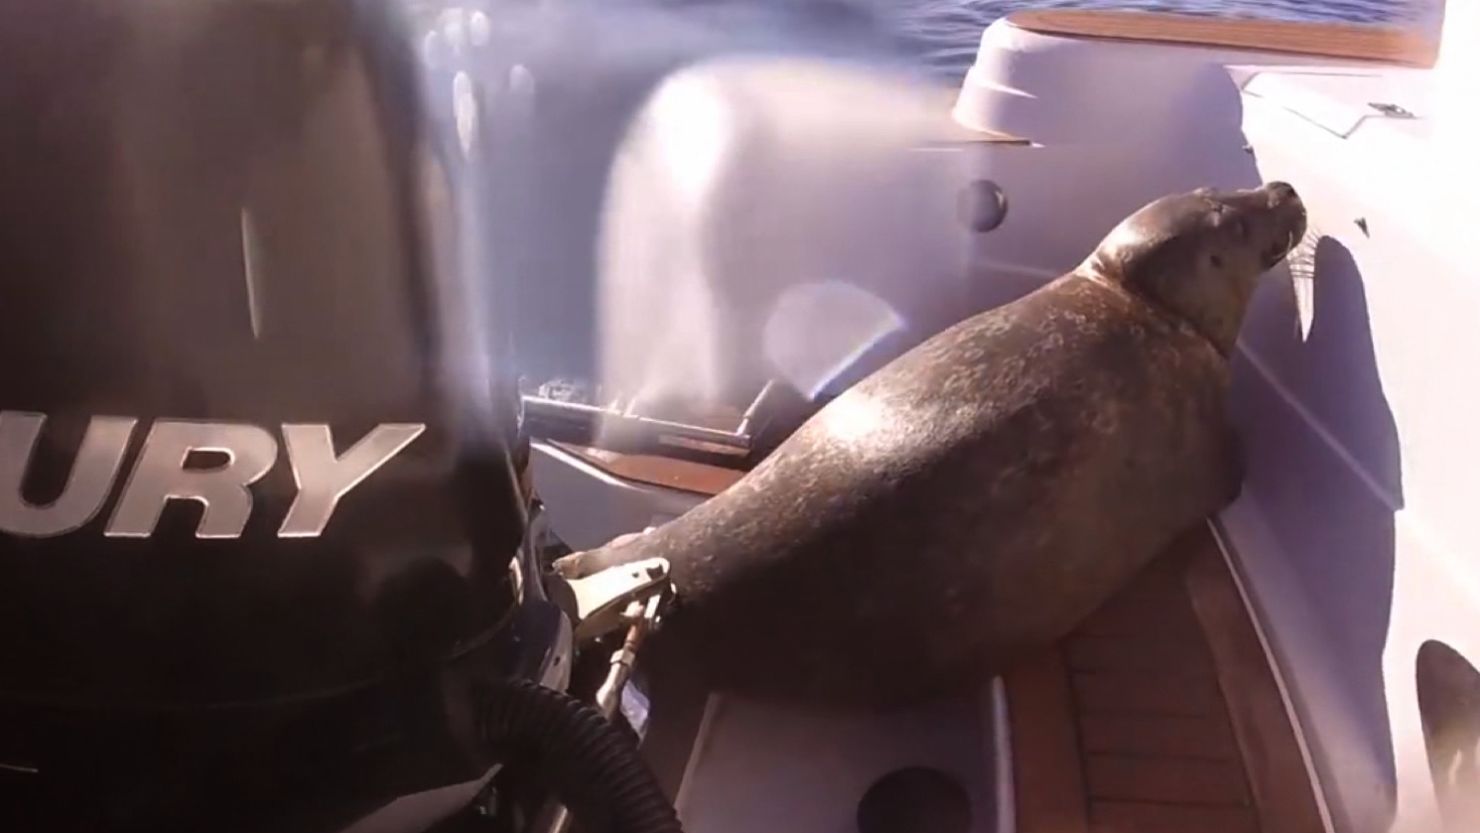 seal jumps on boat to avoid orca whales